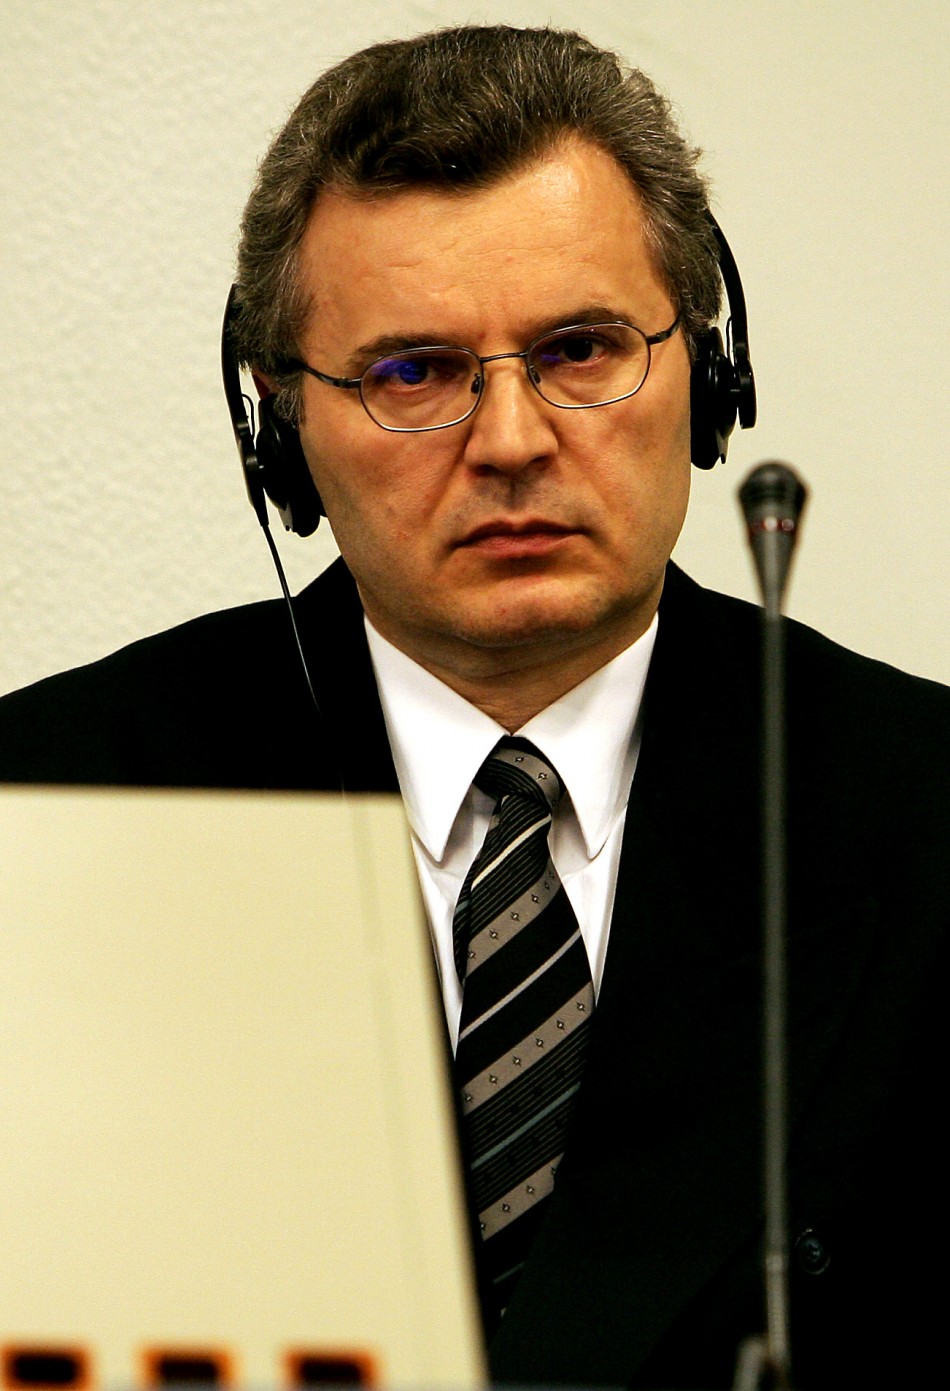 Croatian Serb leader Babic sits in the court room of the ICTY for his appeals judgement in The Hague.